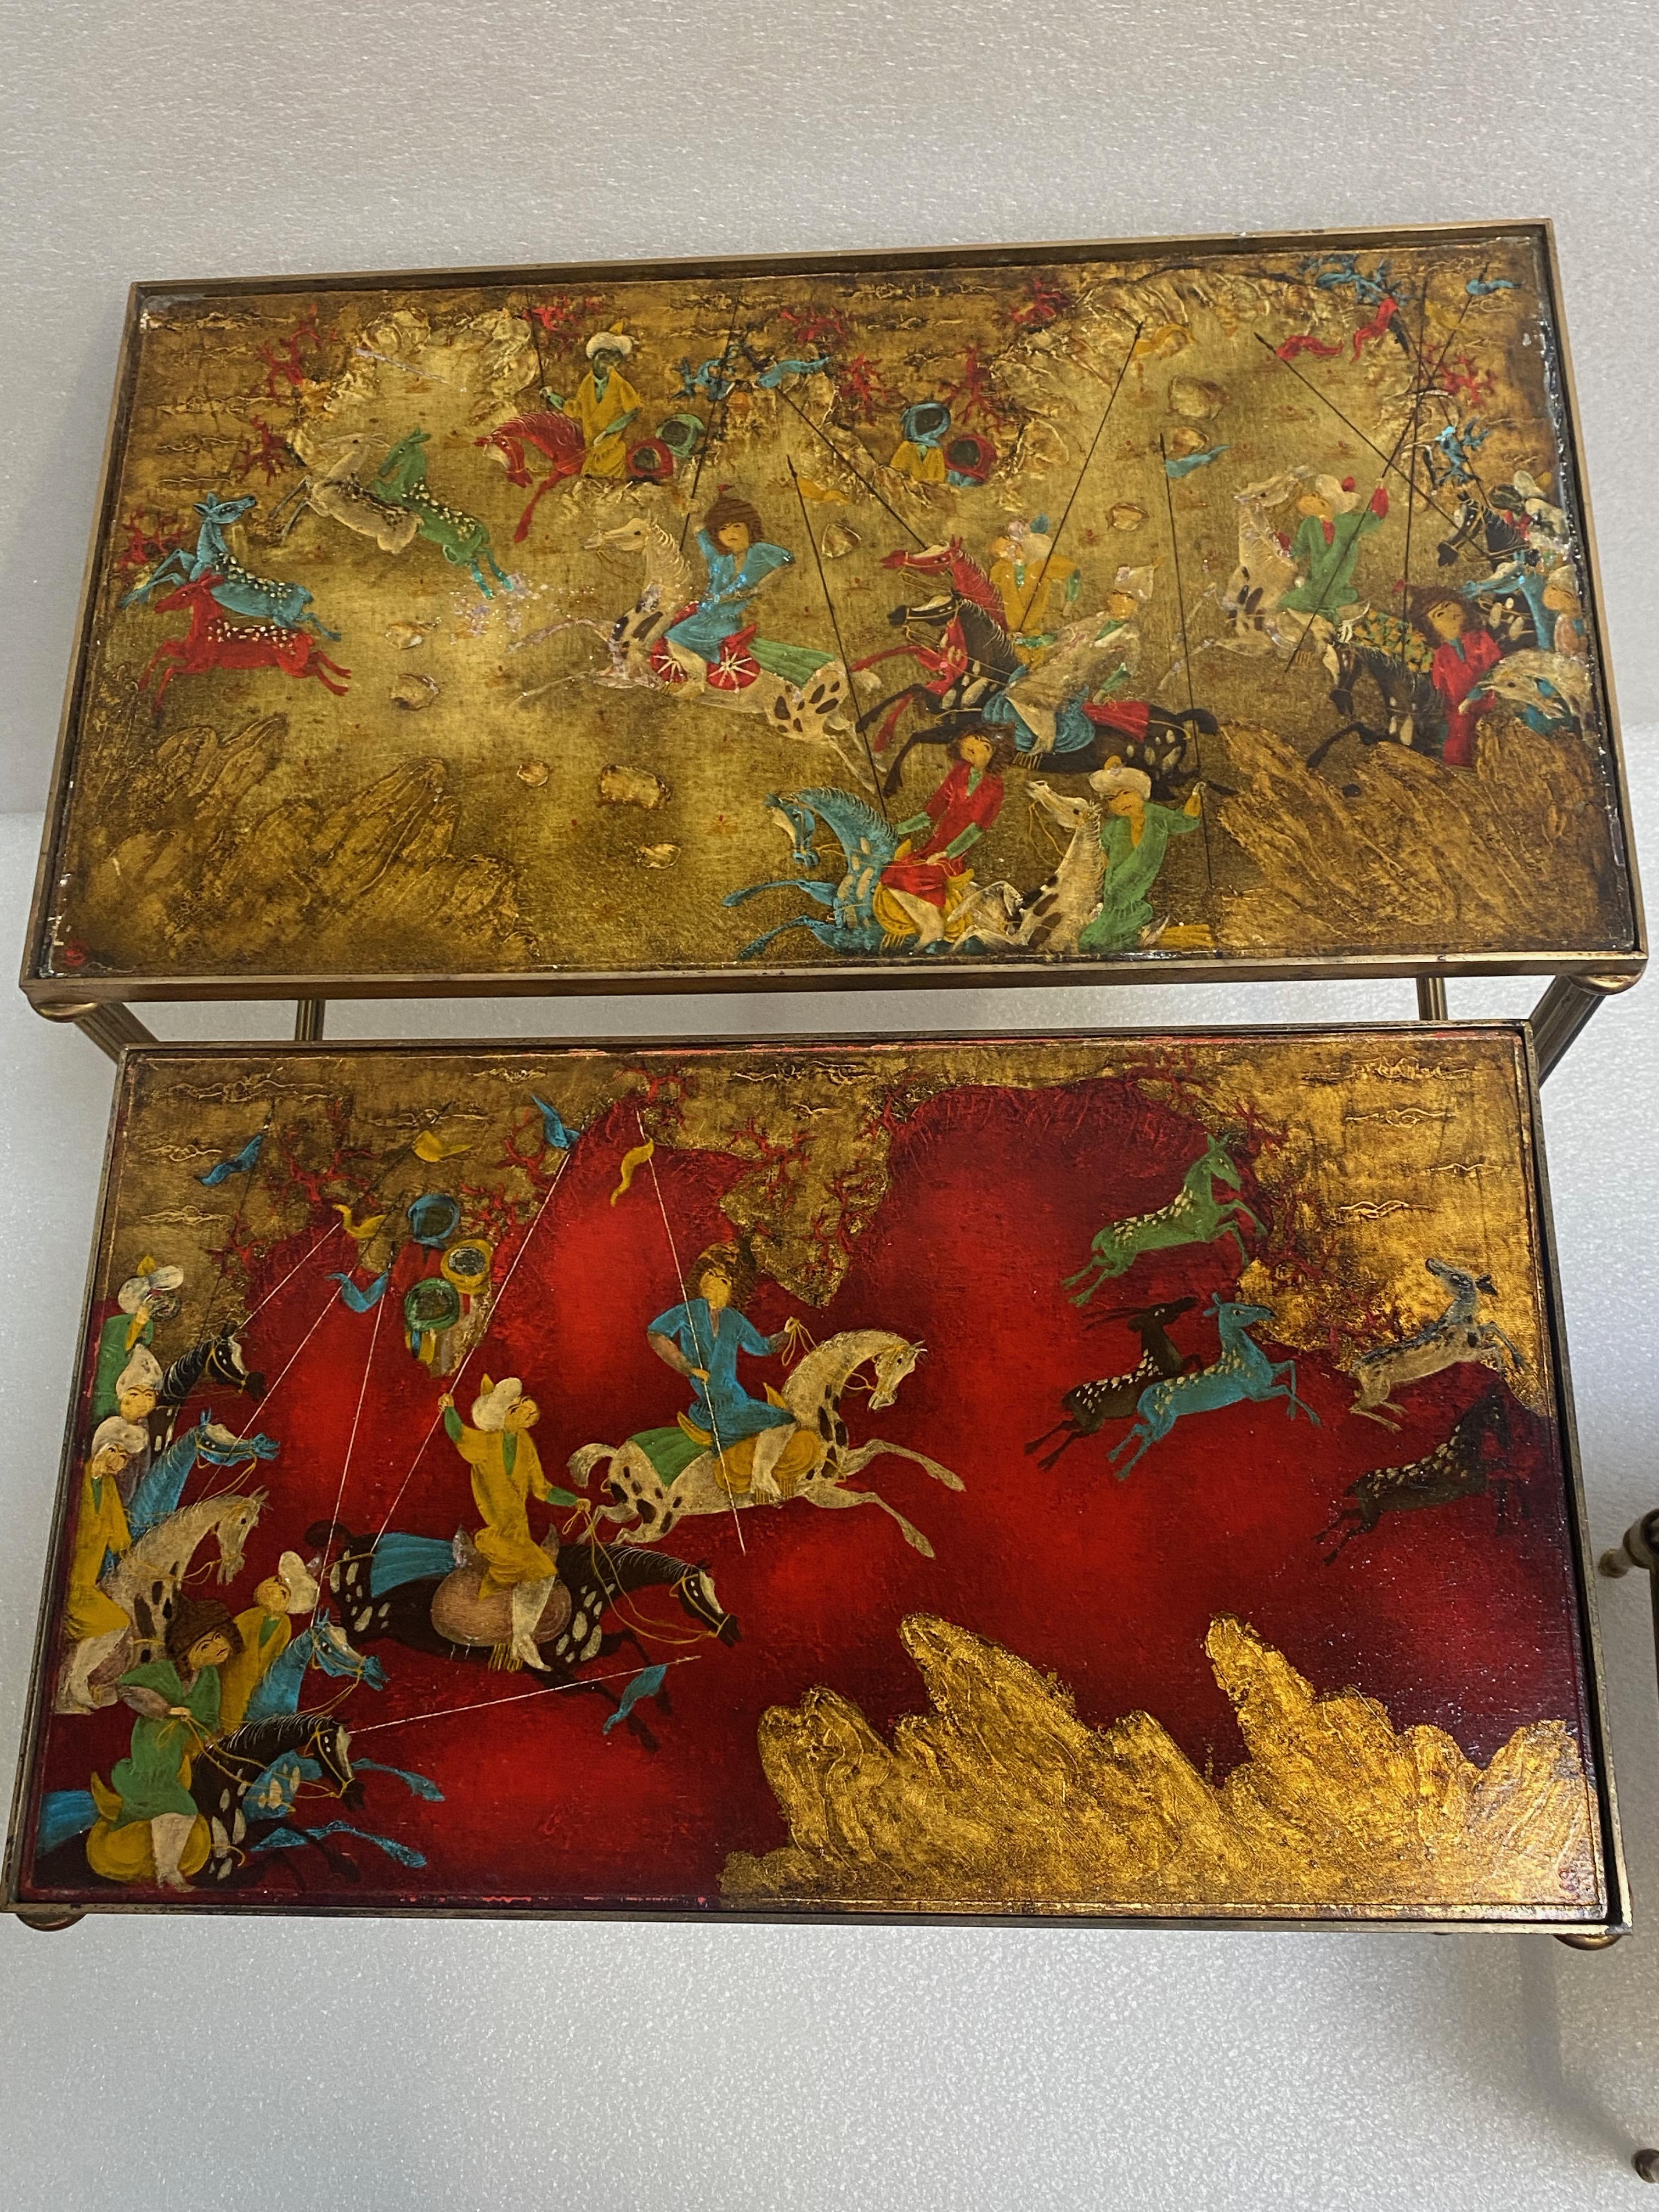 Series of 3 bronze nesting tables with fluted uprights
Trays decorated with paintings and gilding about Mongol warriors
57 X 31 X H 41 cm
51 X 30 X H 38 cm
45 X 29 X H 36 cm
condition of use
circa 1950.